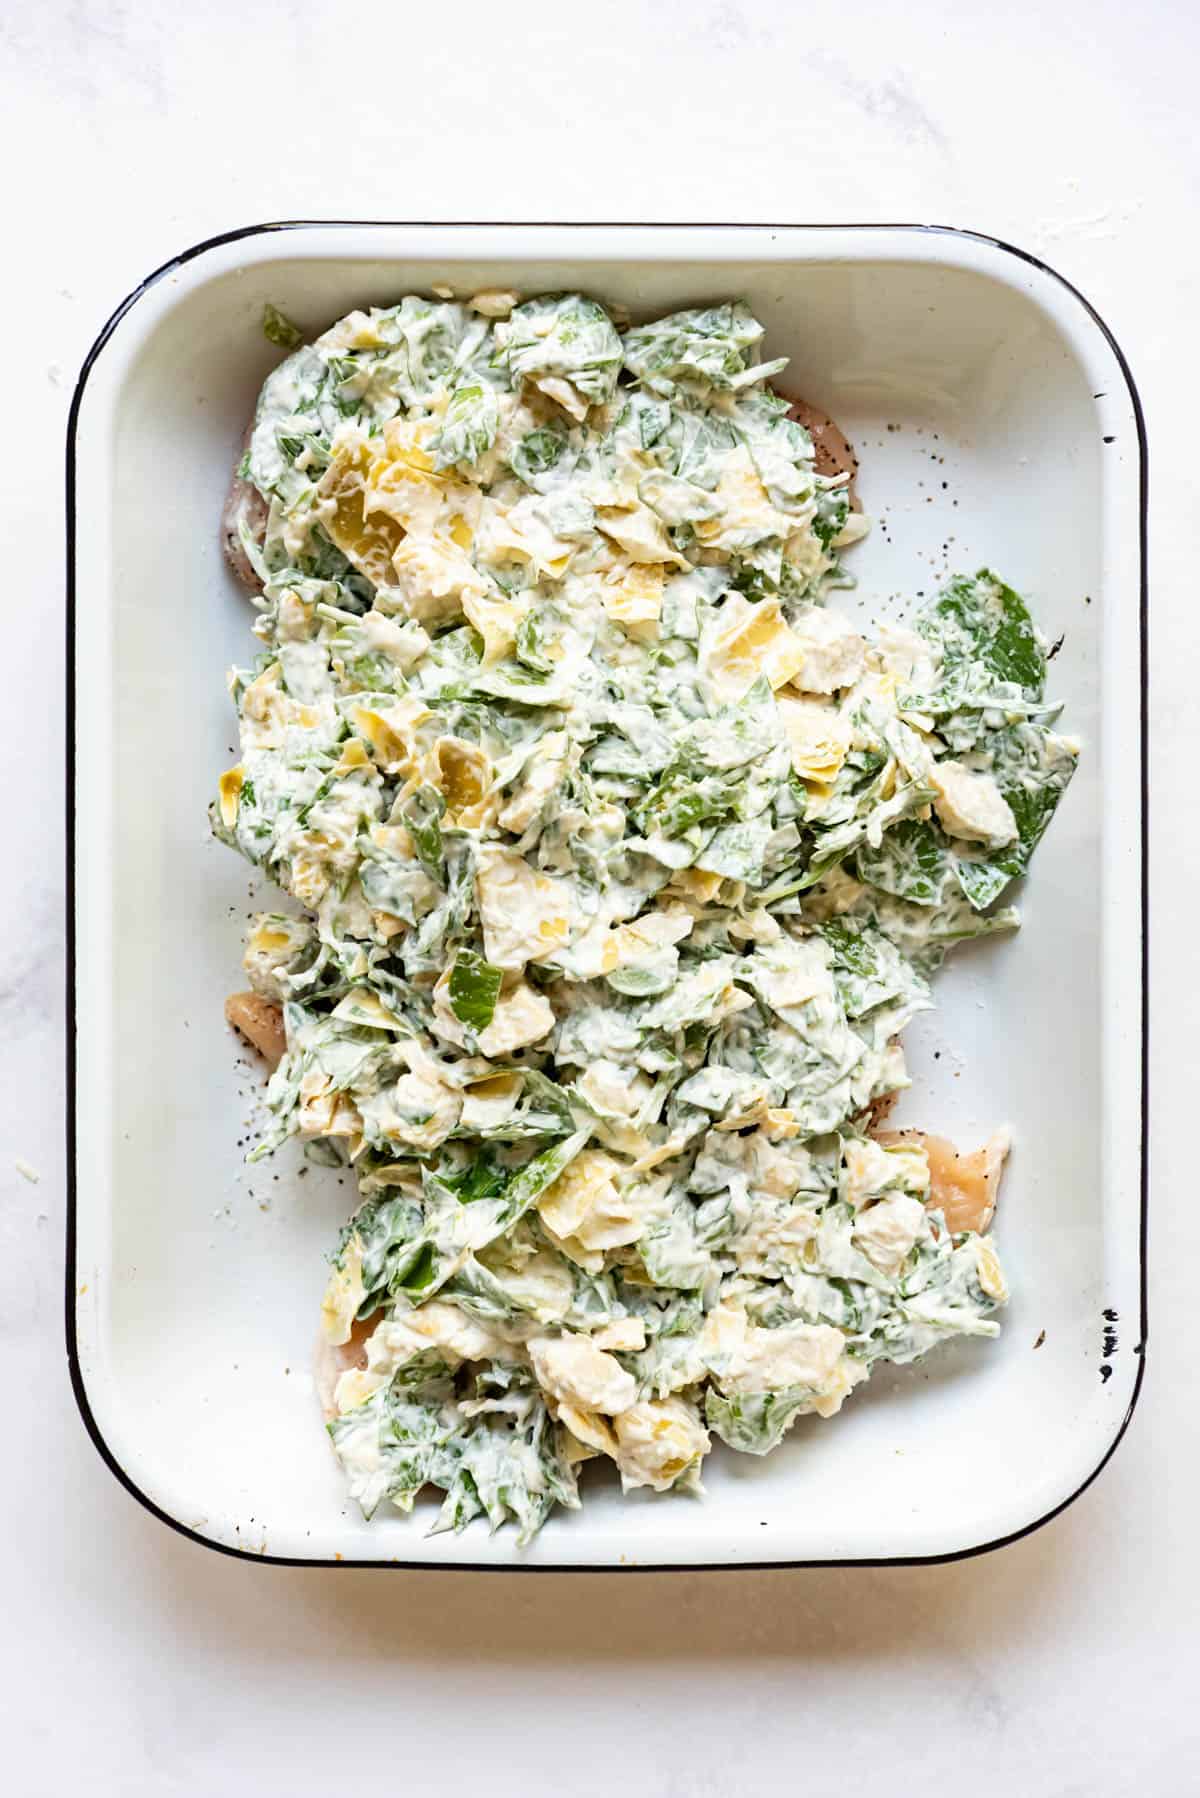 Spreading spinach artichoke mixture over chicken breasts in a baking dish.